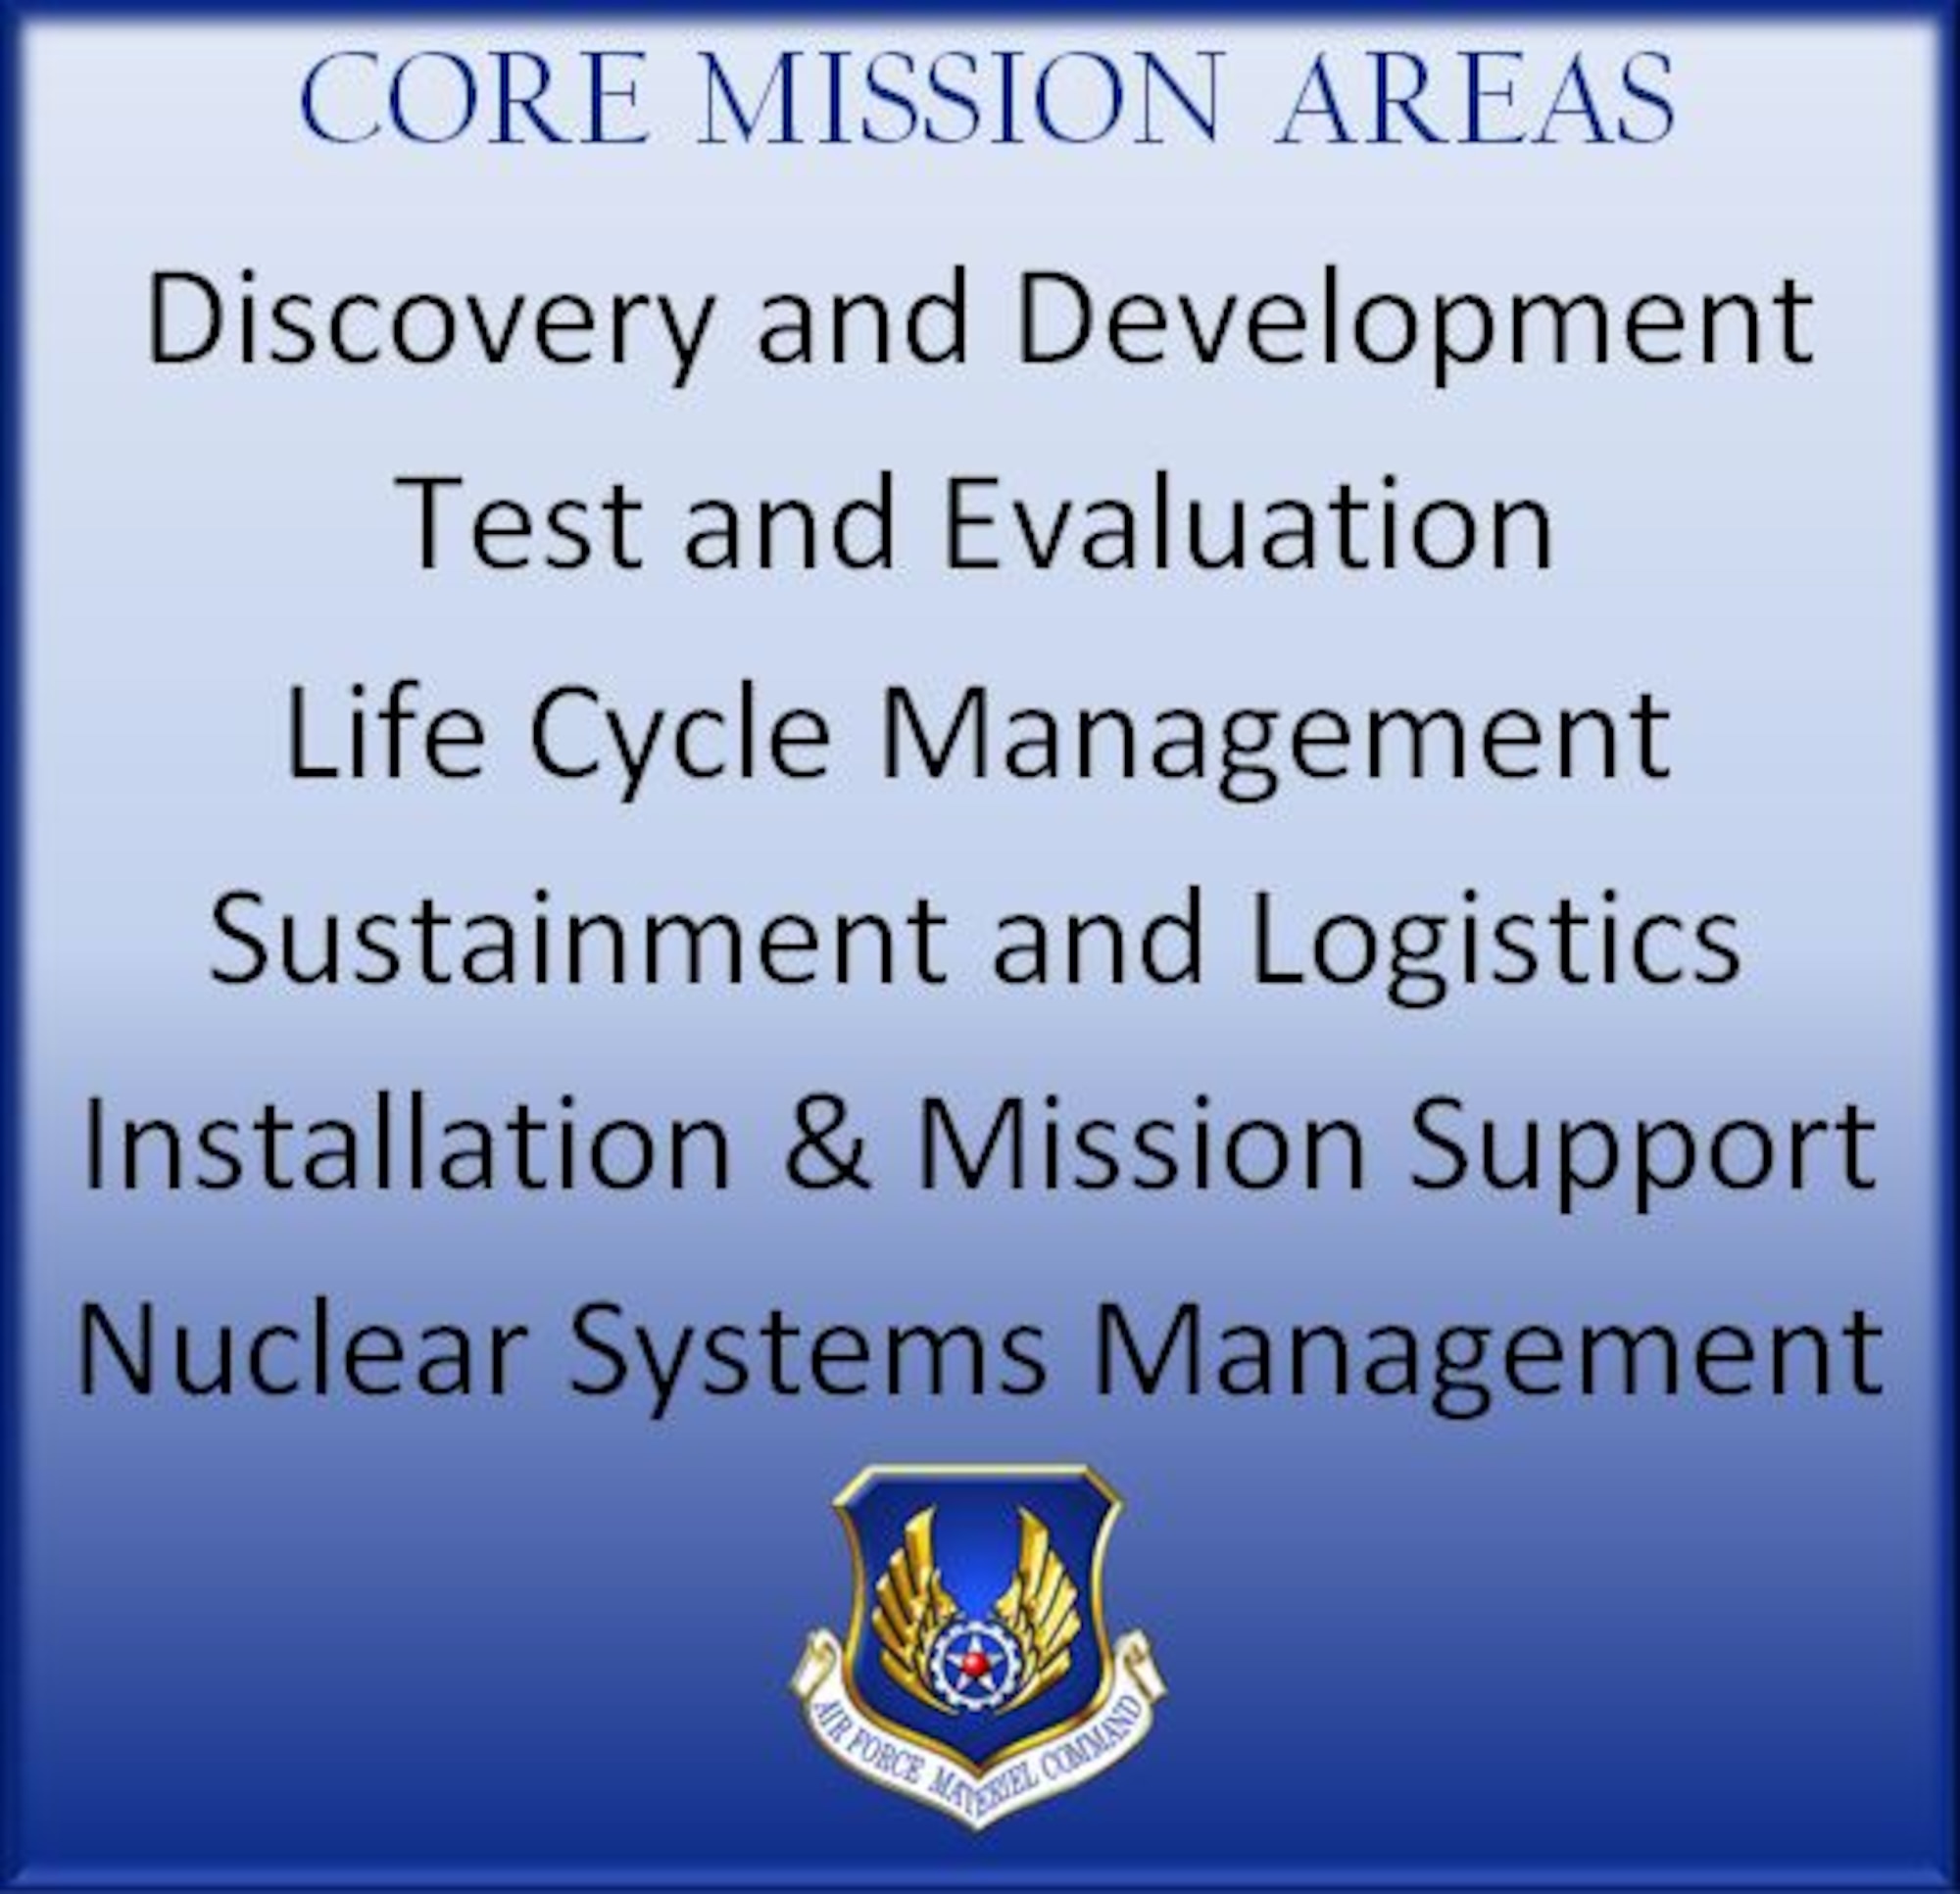 AFMC's core mission areas.